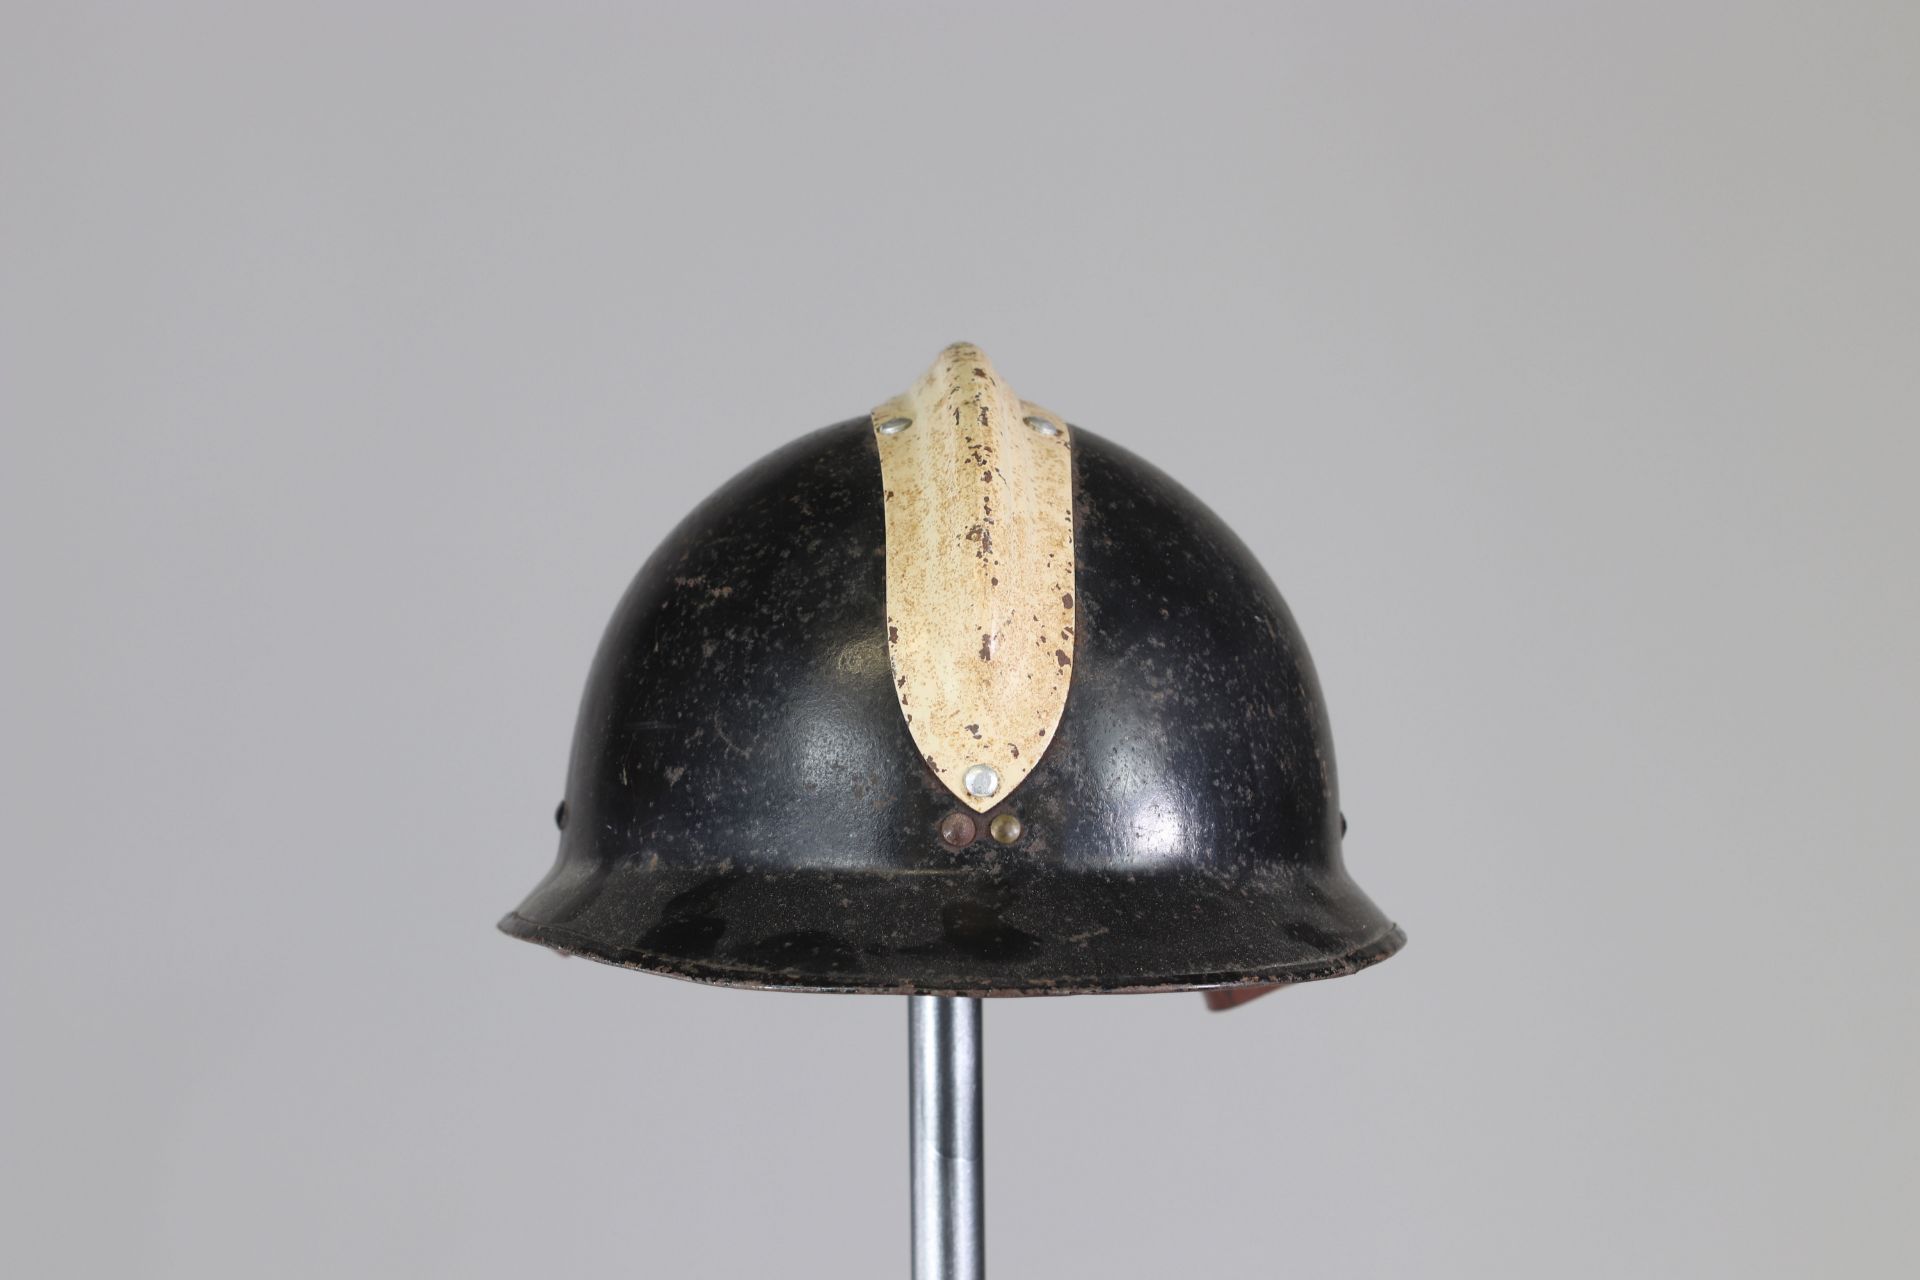 French WWII passive defense helmet - Image 4 of 5